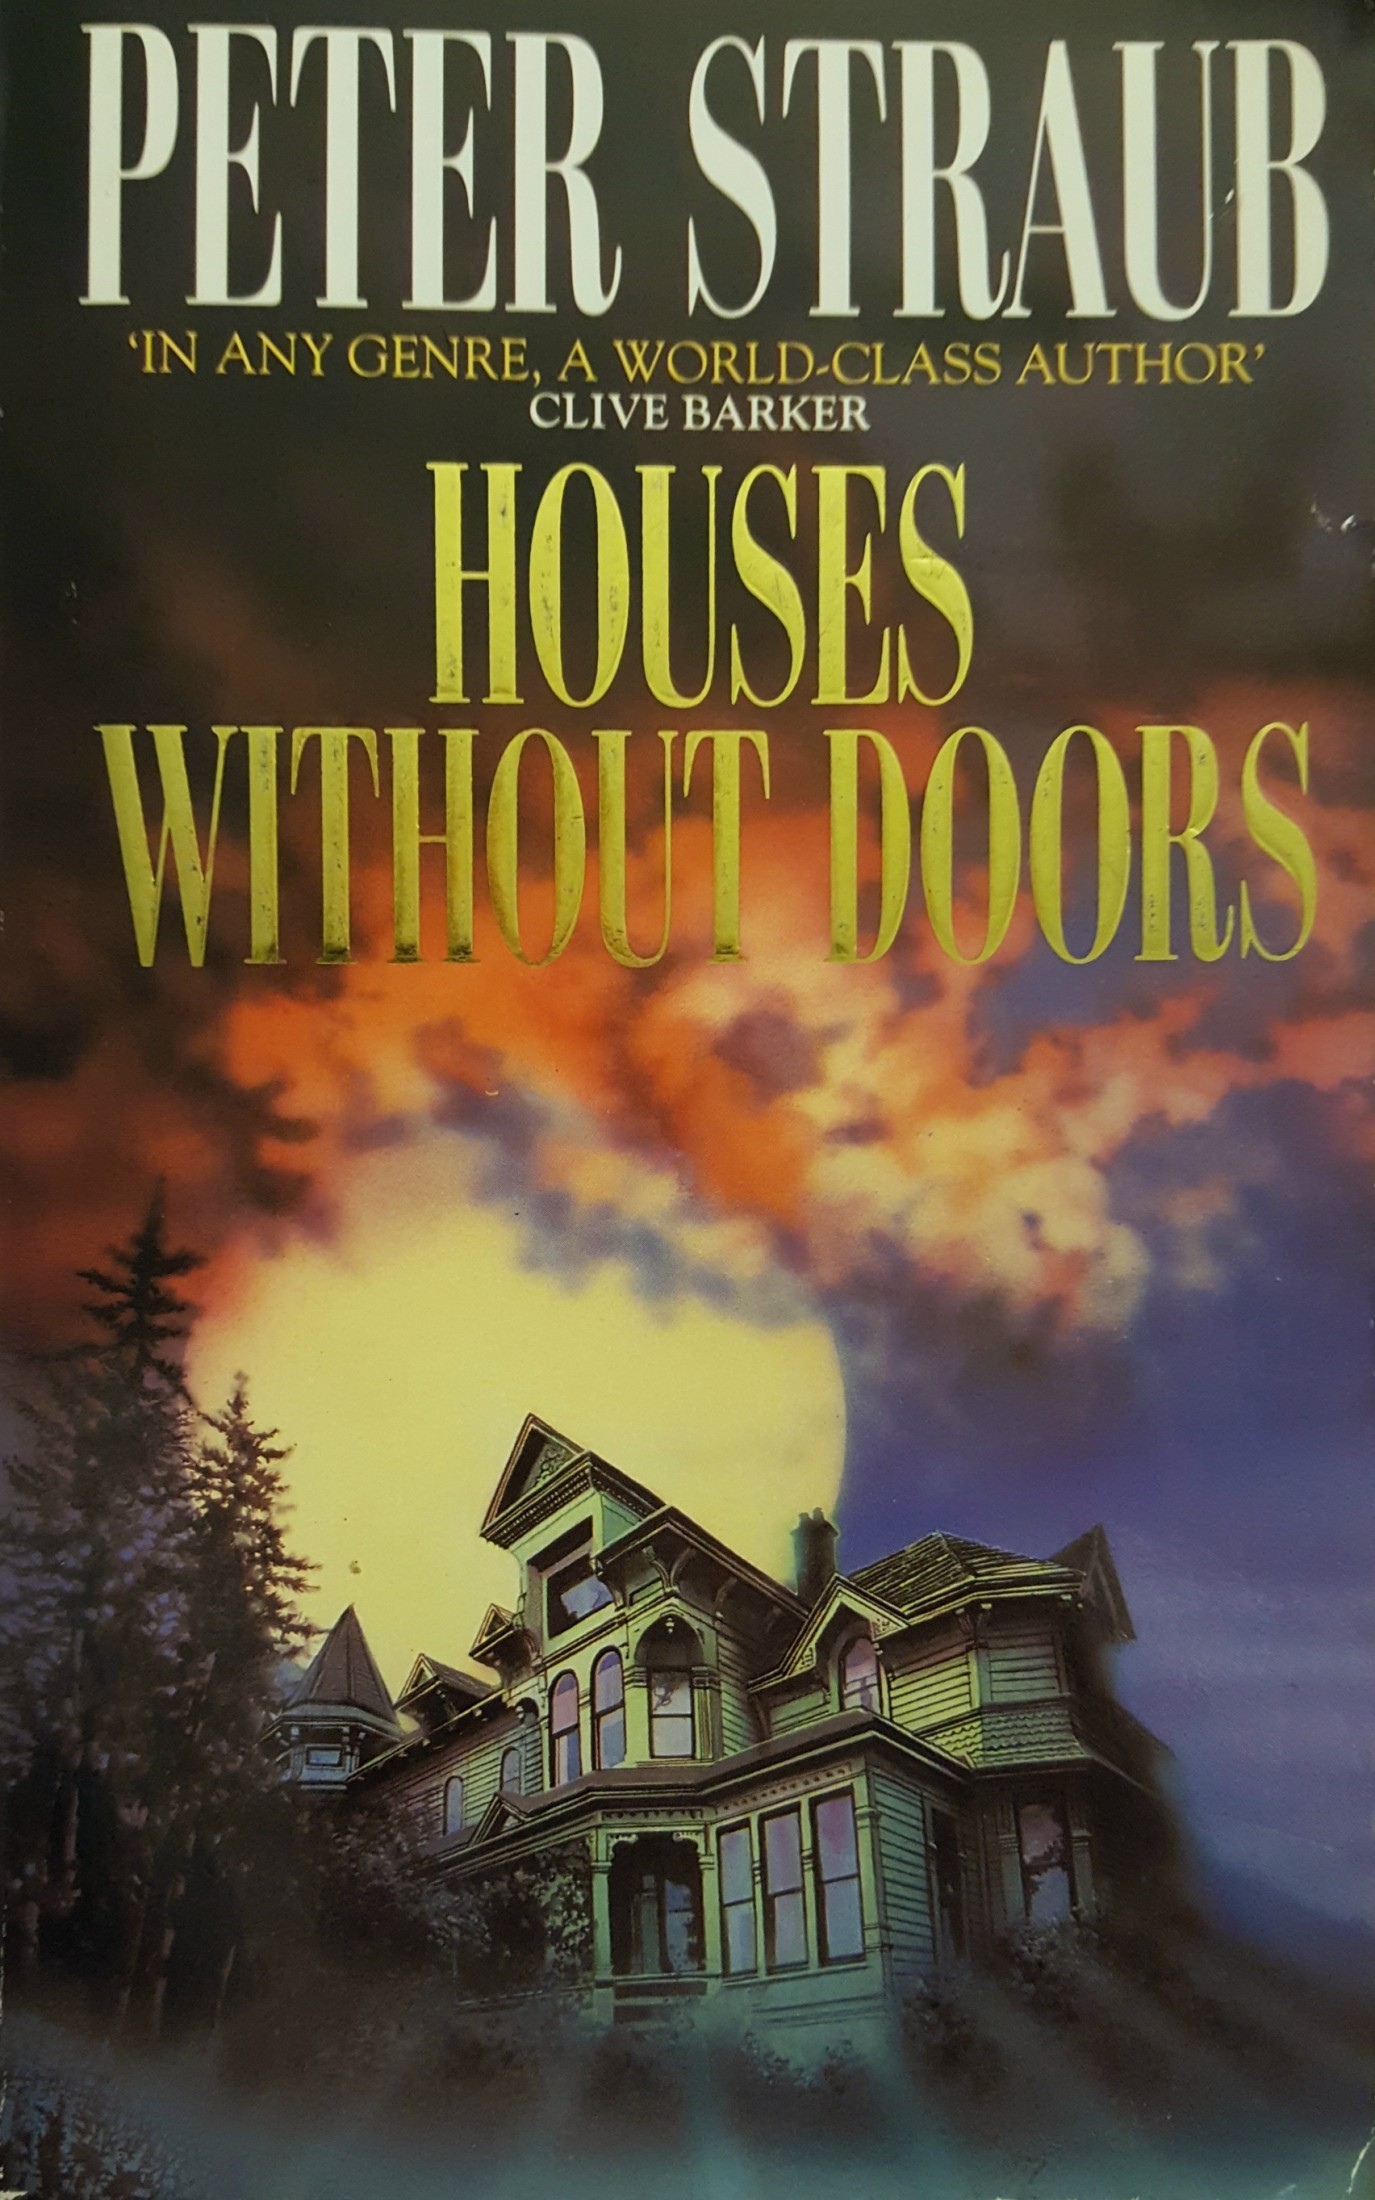 Houses Without Doors